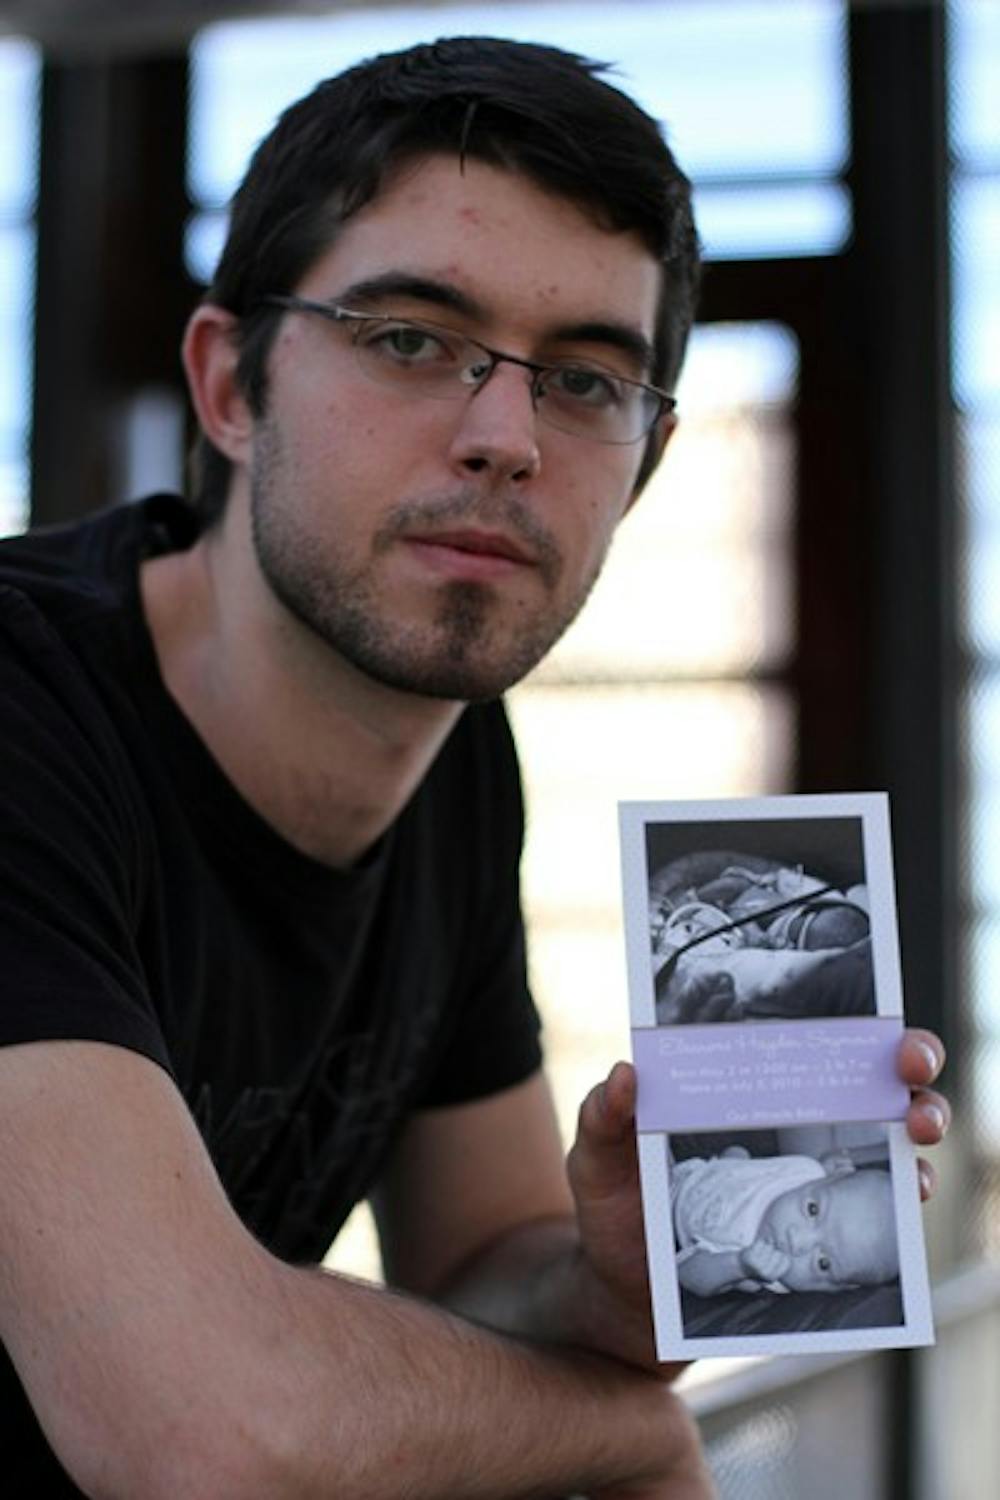 IN REMEMBRANCE: Mechanical engineering senior Peter Seymour holds the birth announcement of his daughter Eleanore, who passed away in August 2010 from Sudden Infant Death Syndrome.  Seymour is creating a device that monitors vital signs and can be accessed from a smartphone application. (Photo by Lisa Bartoli)